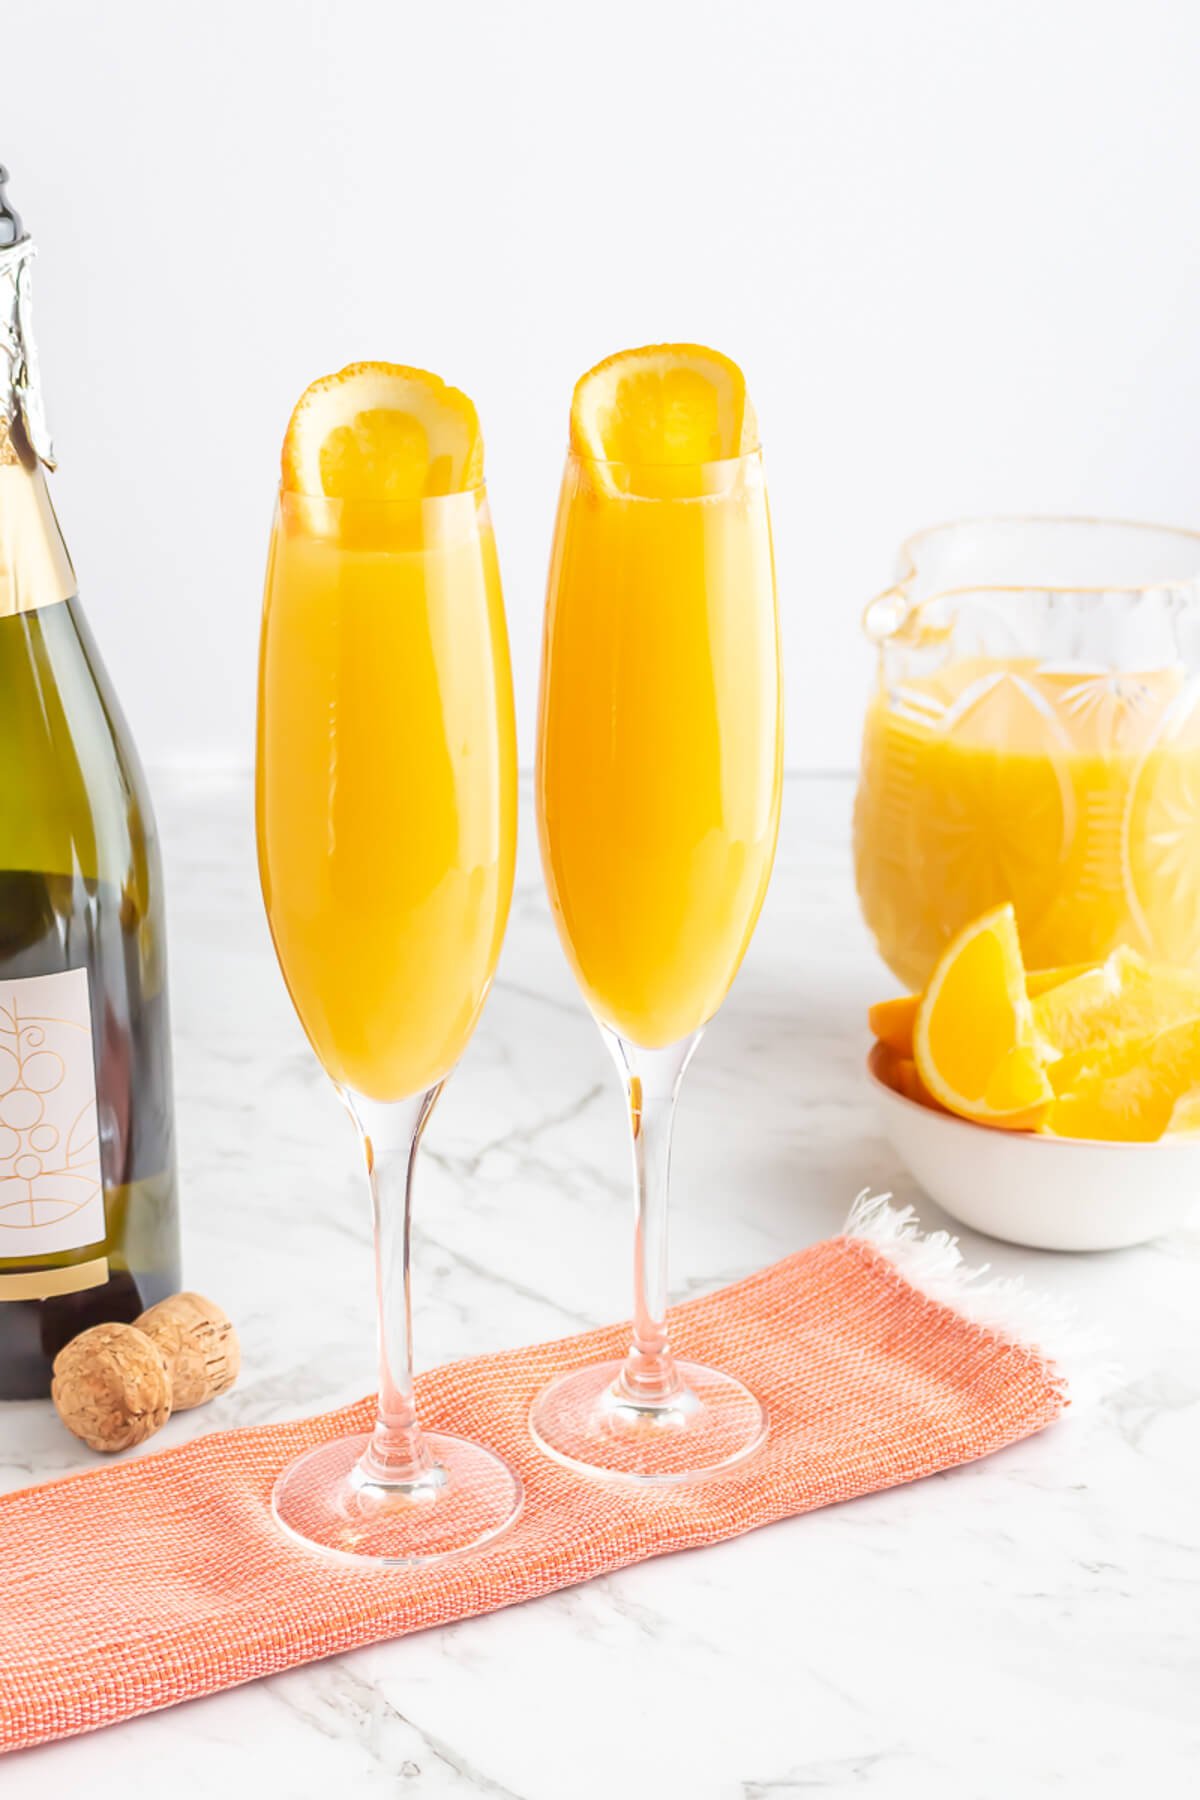 champagne glasses filled with orange liquid and garnished with a round of orange sitting on an orange tea towel.